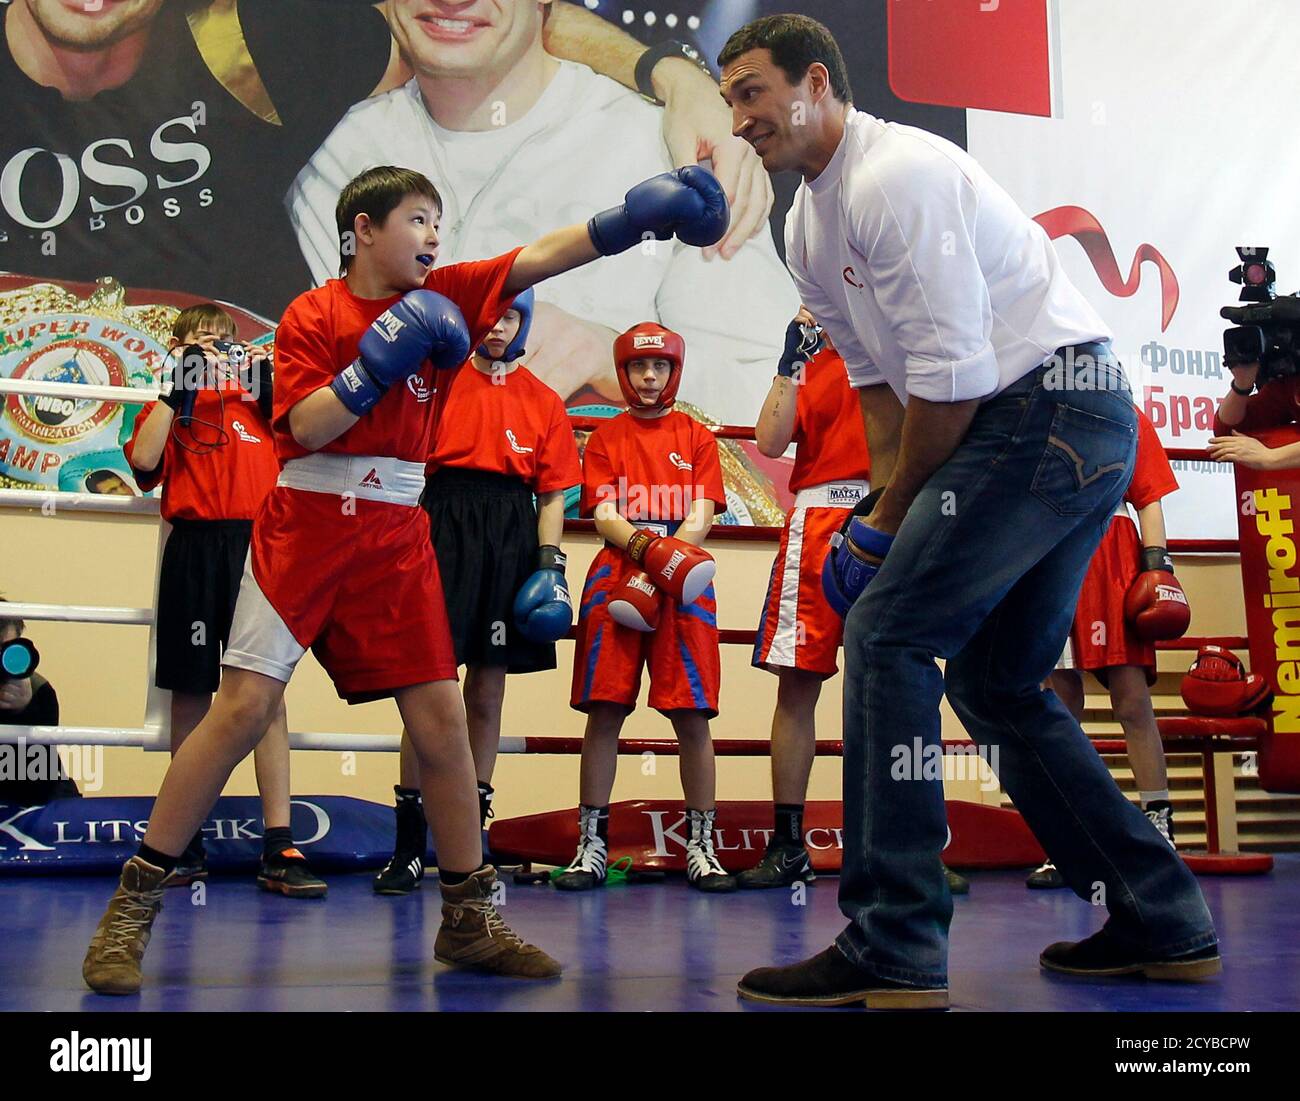 IBF, WBO and IBO heavyweight champion boxer Vladimir Klitschko (R) of  Ukraine helps out with training during a session with the best young  Ukranian boxers in Kiev March 2, 2011. REUTERS/Gleb Garanich (